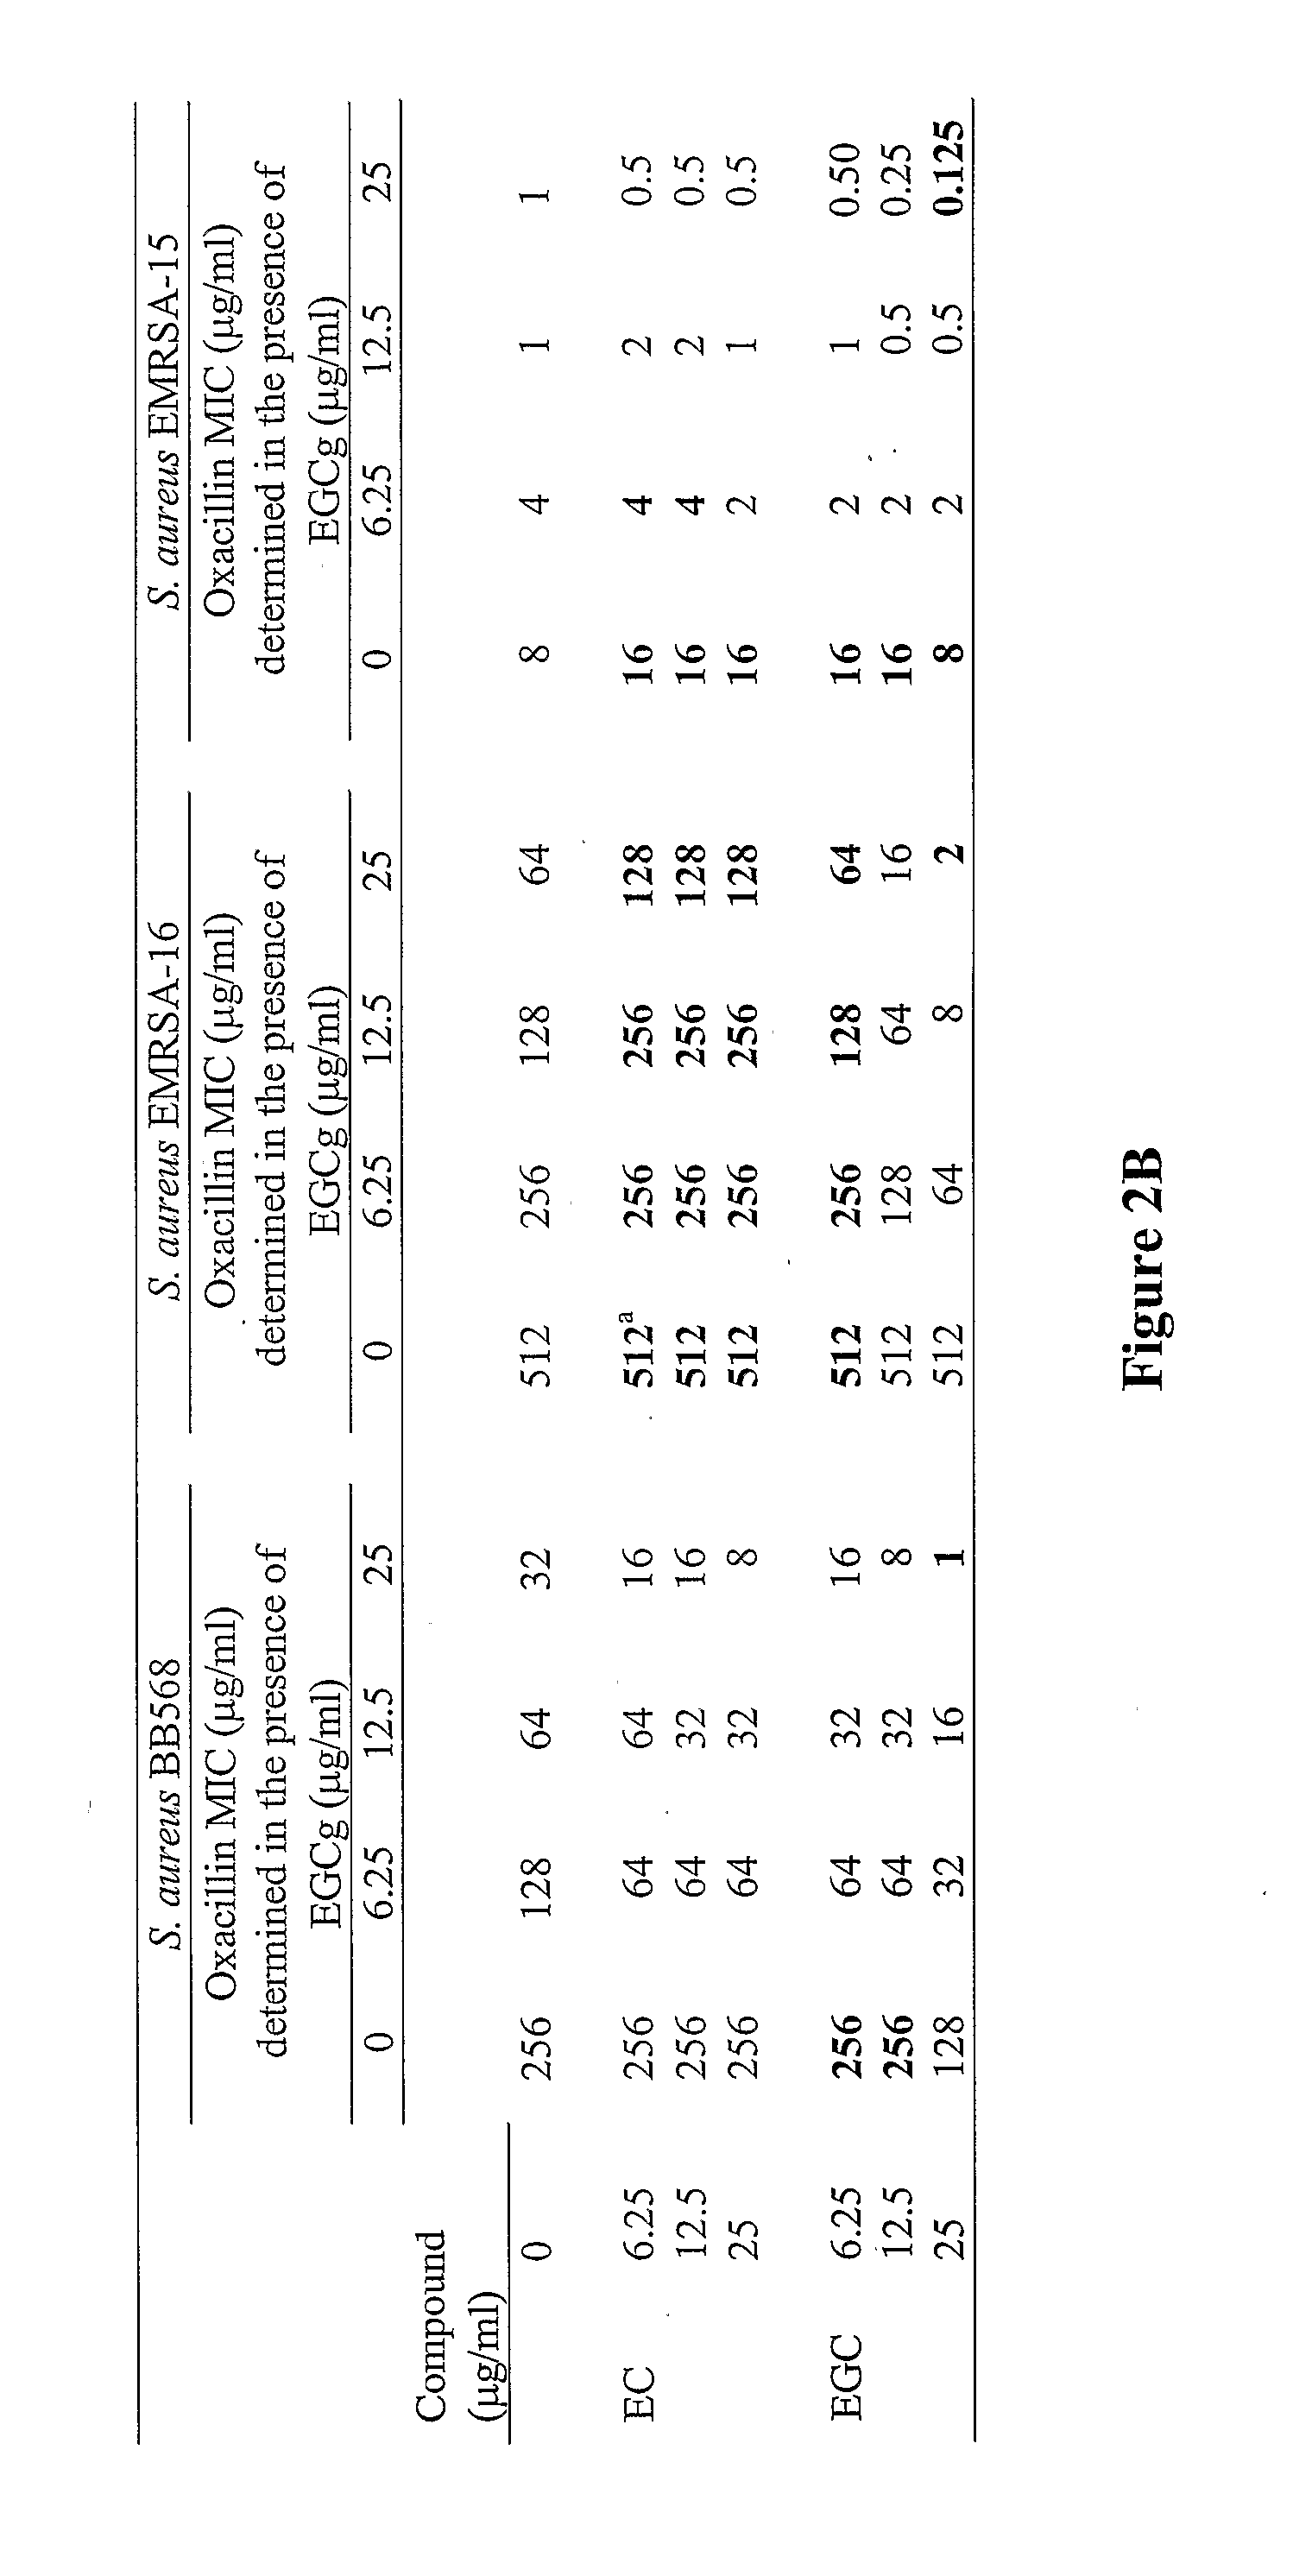 Compositions and Methods of Sensitizing Methicillin Resistant Staphylococcus Aureus to Oxacillin